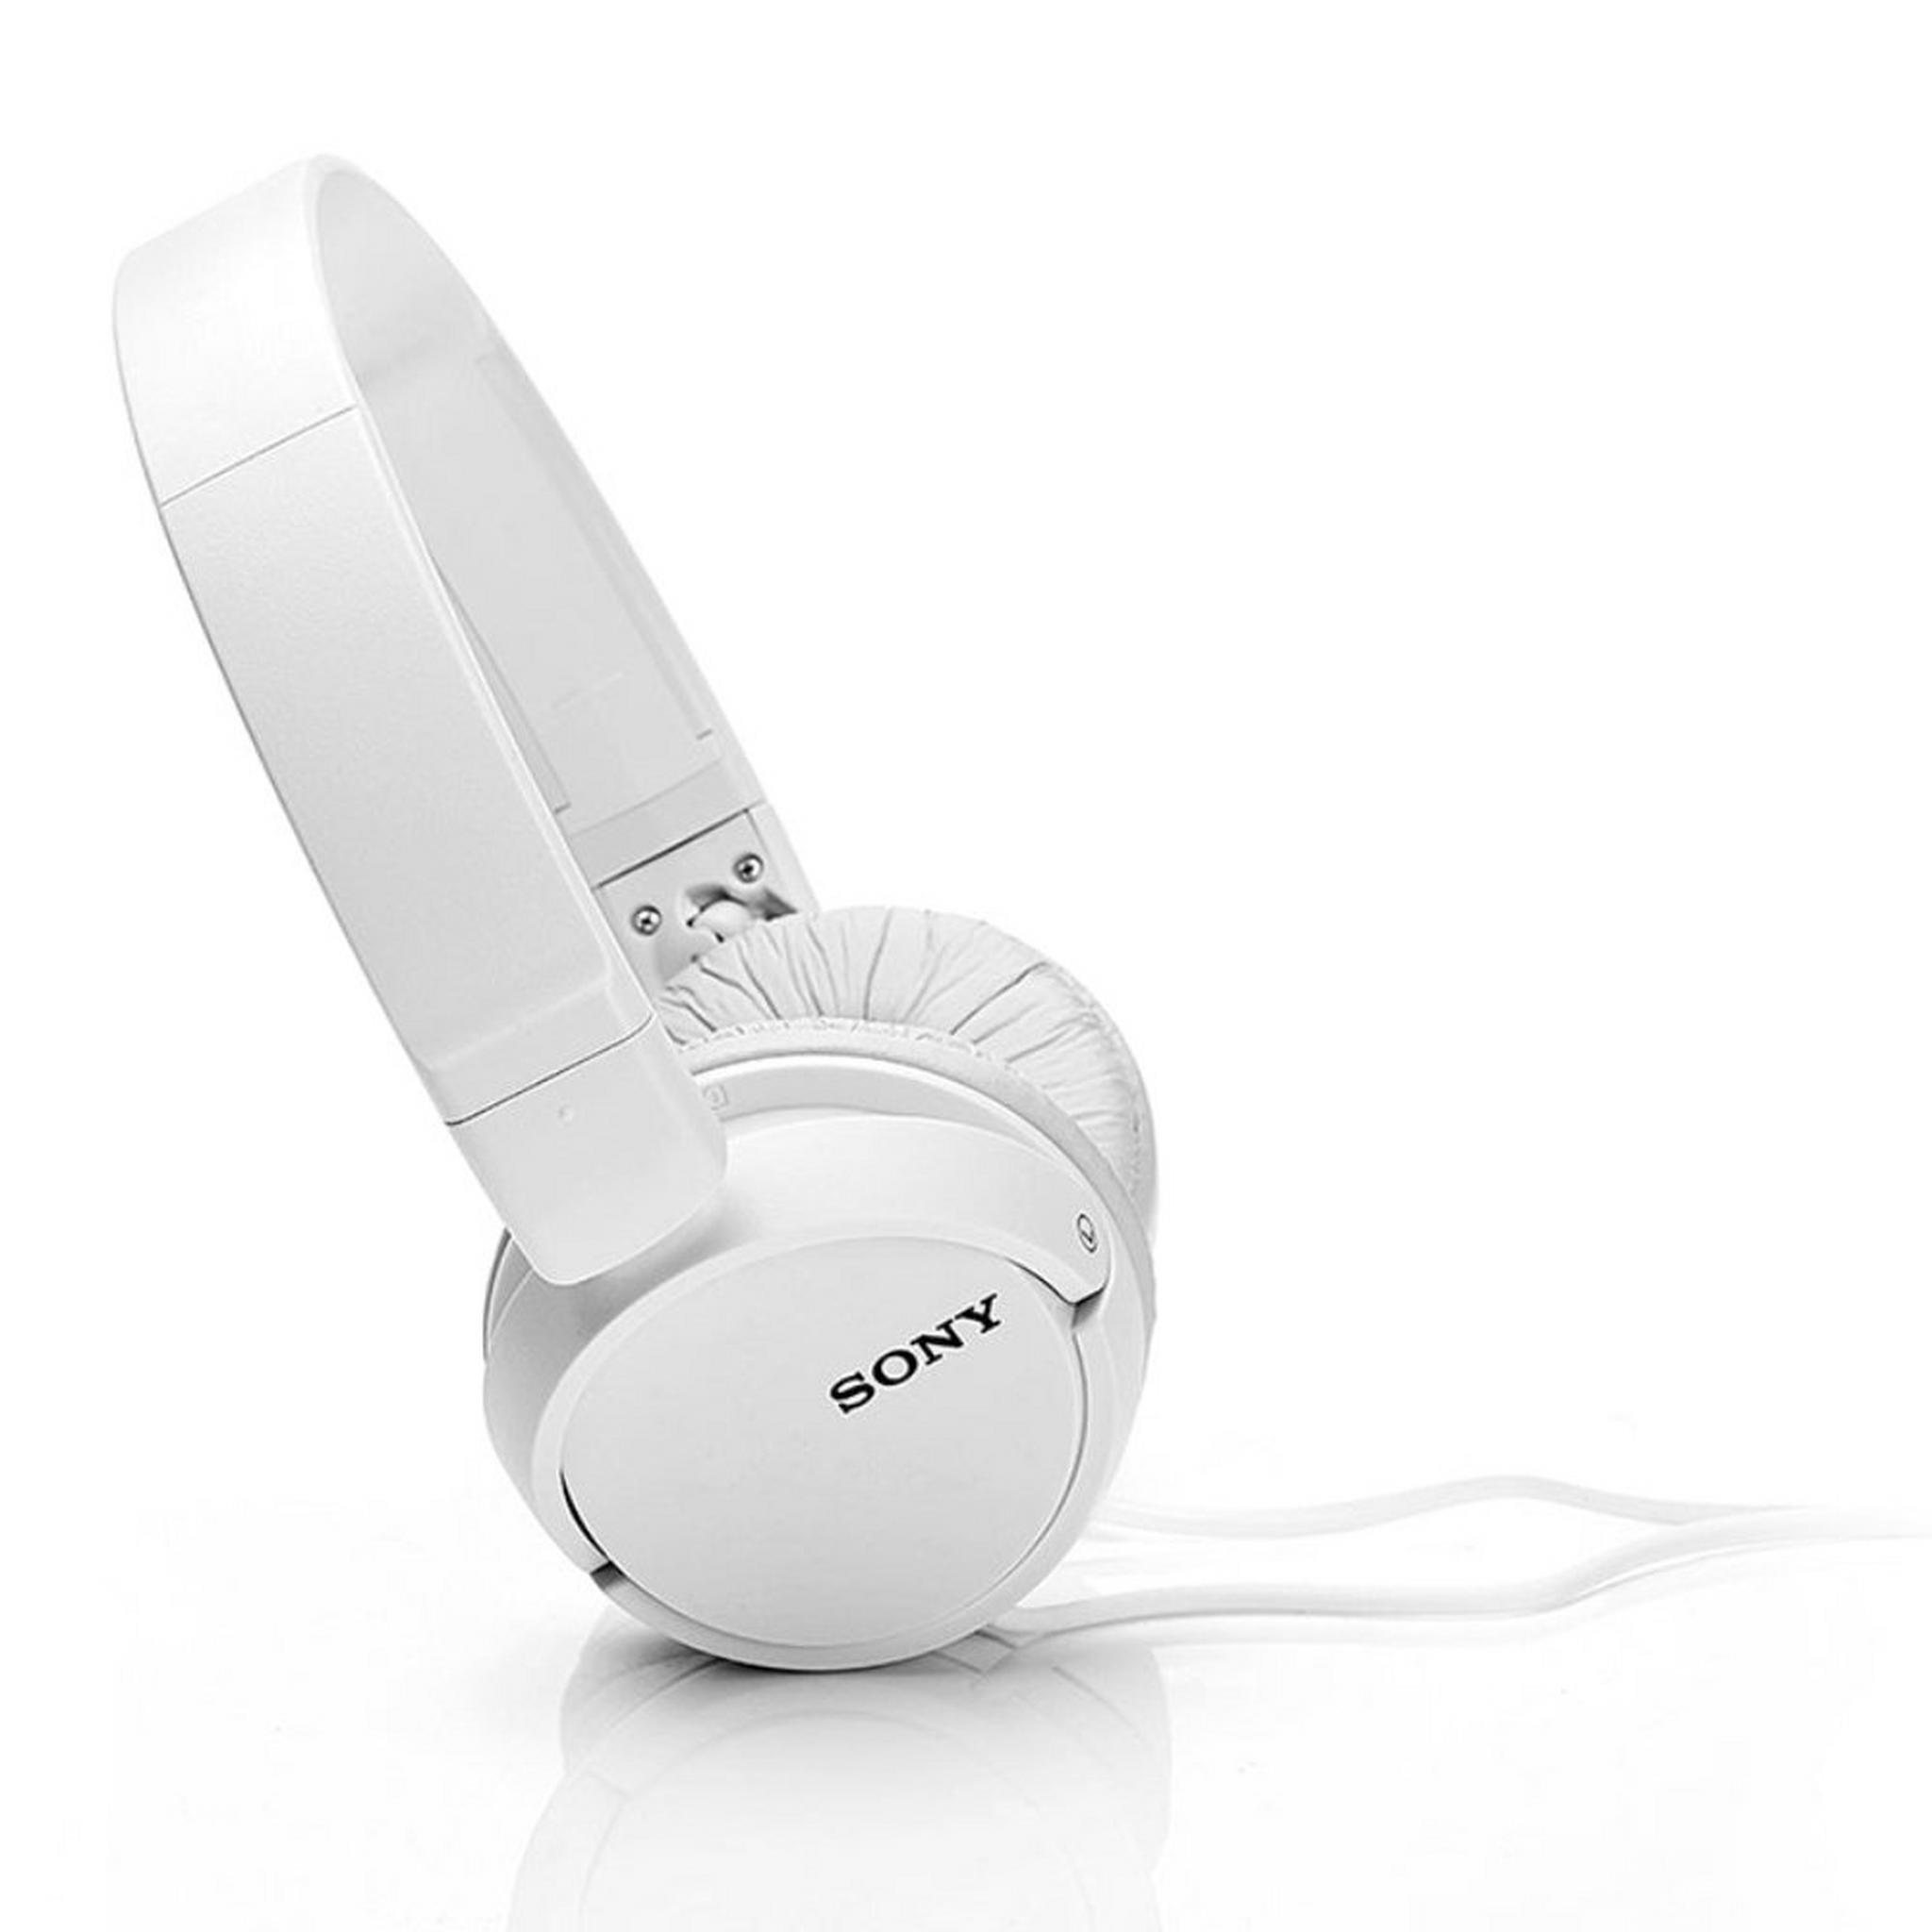 Sony Stereo Headphone with In-Line Mic - White